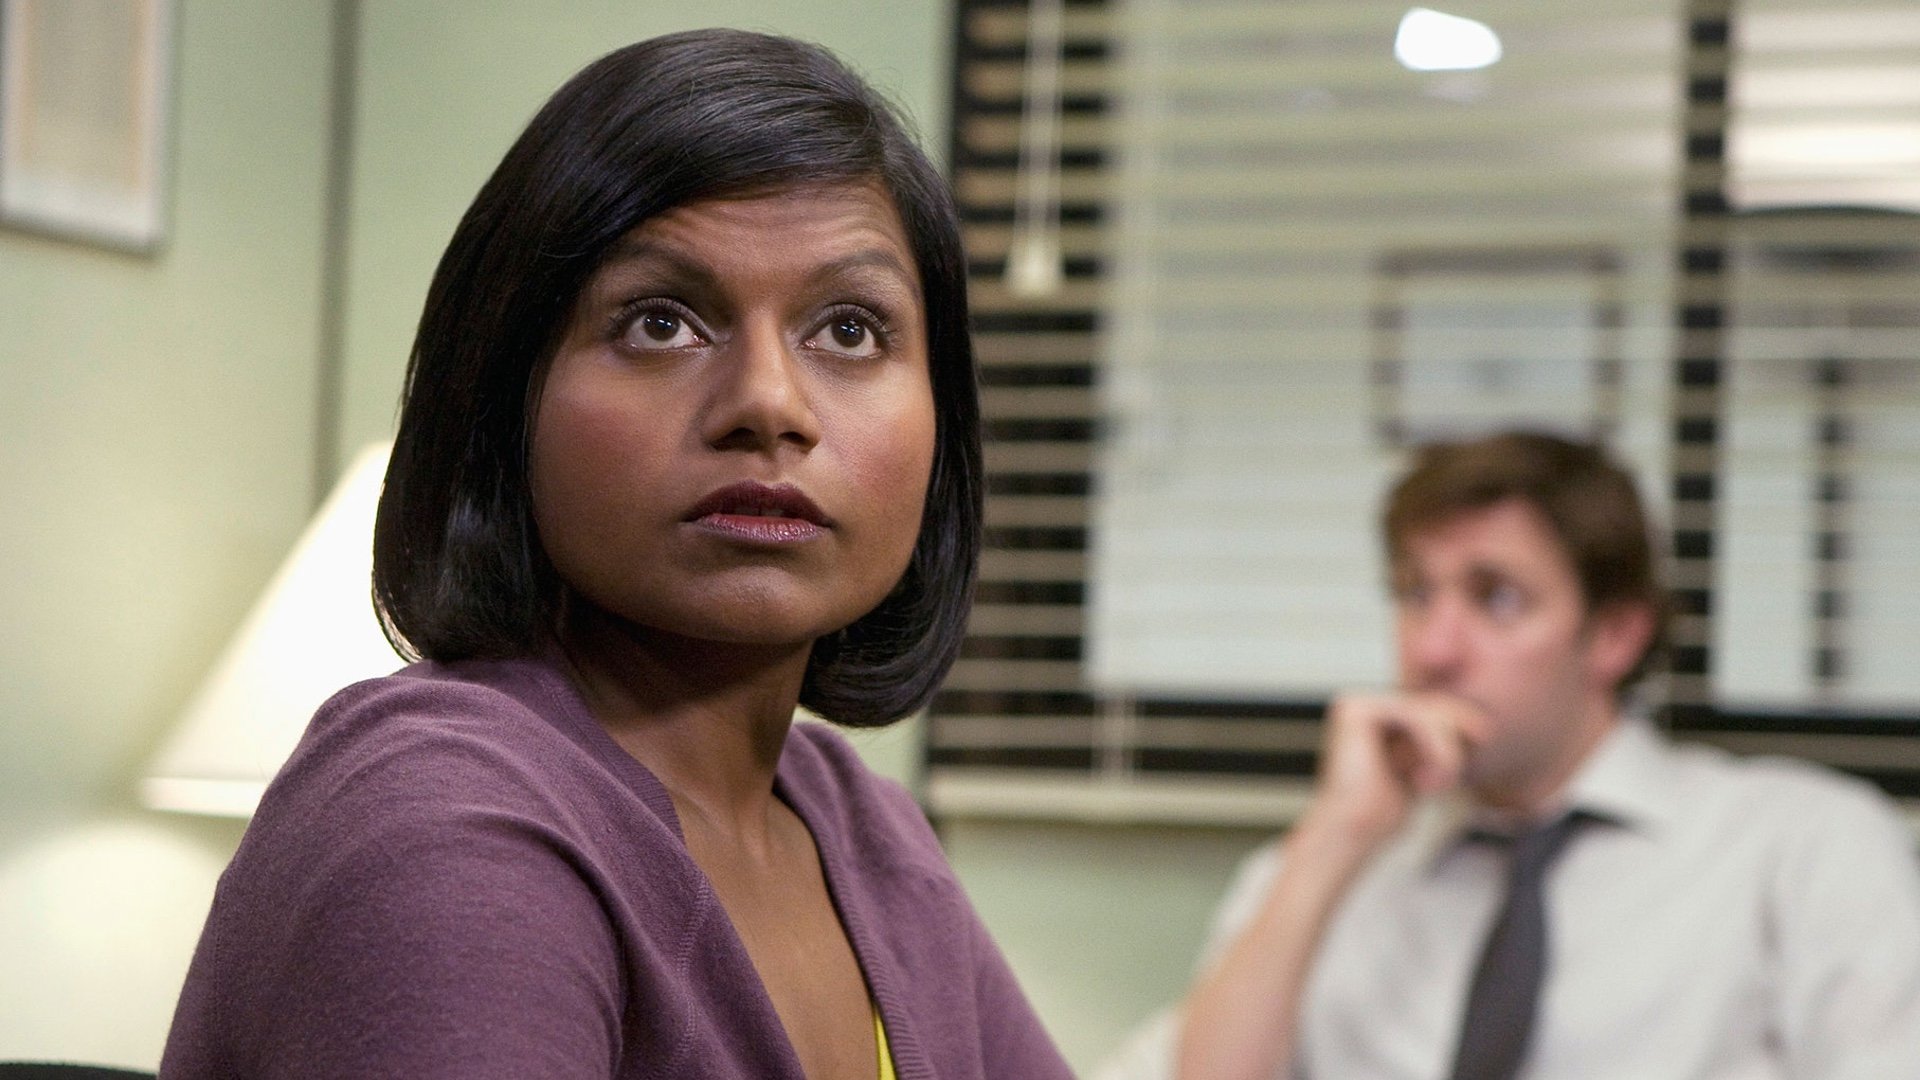 Velma': Why Does Everyone Hate The Mindy Kaling Reboot?